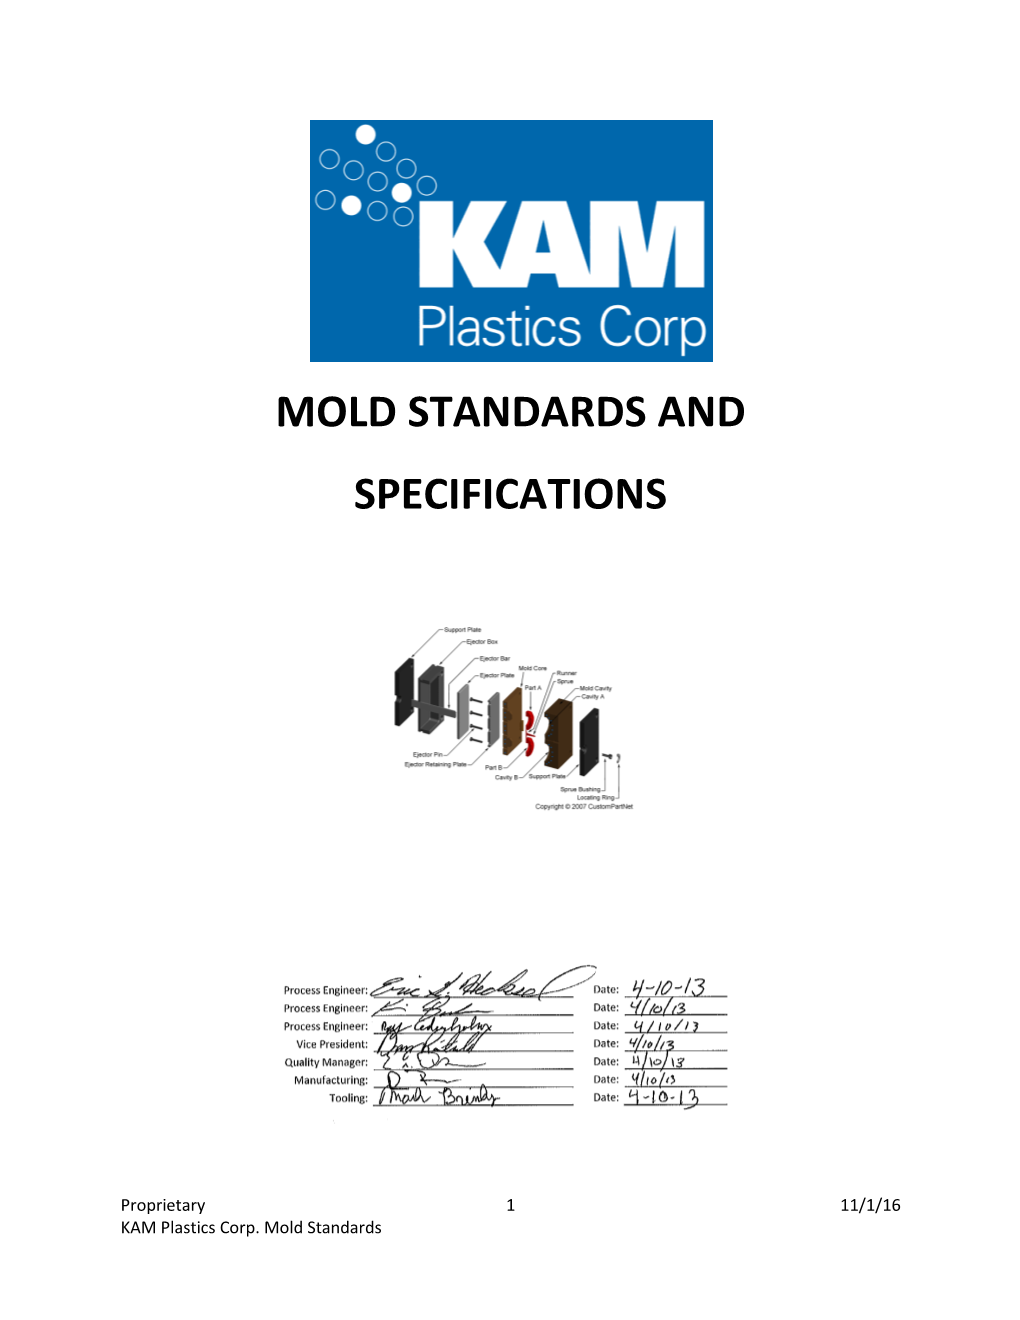 Mold Standards and Specifications